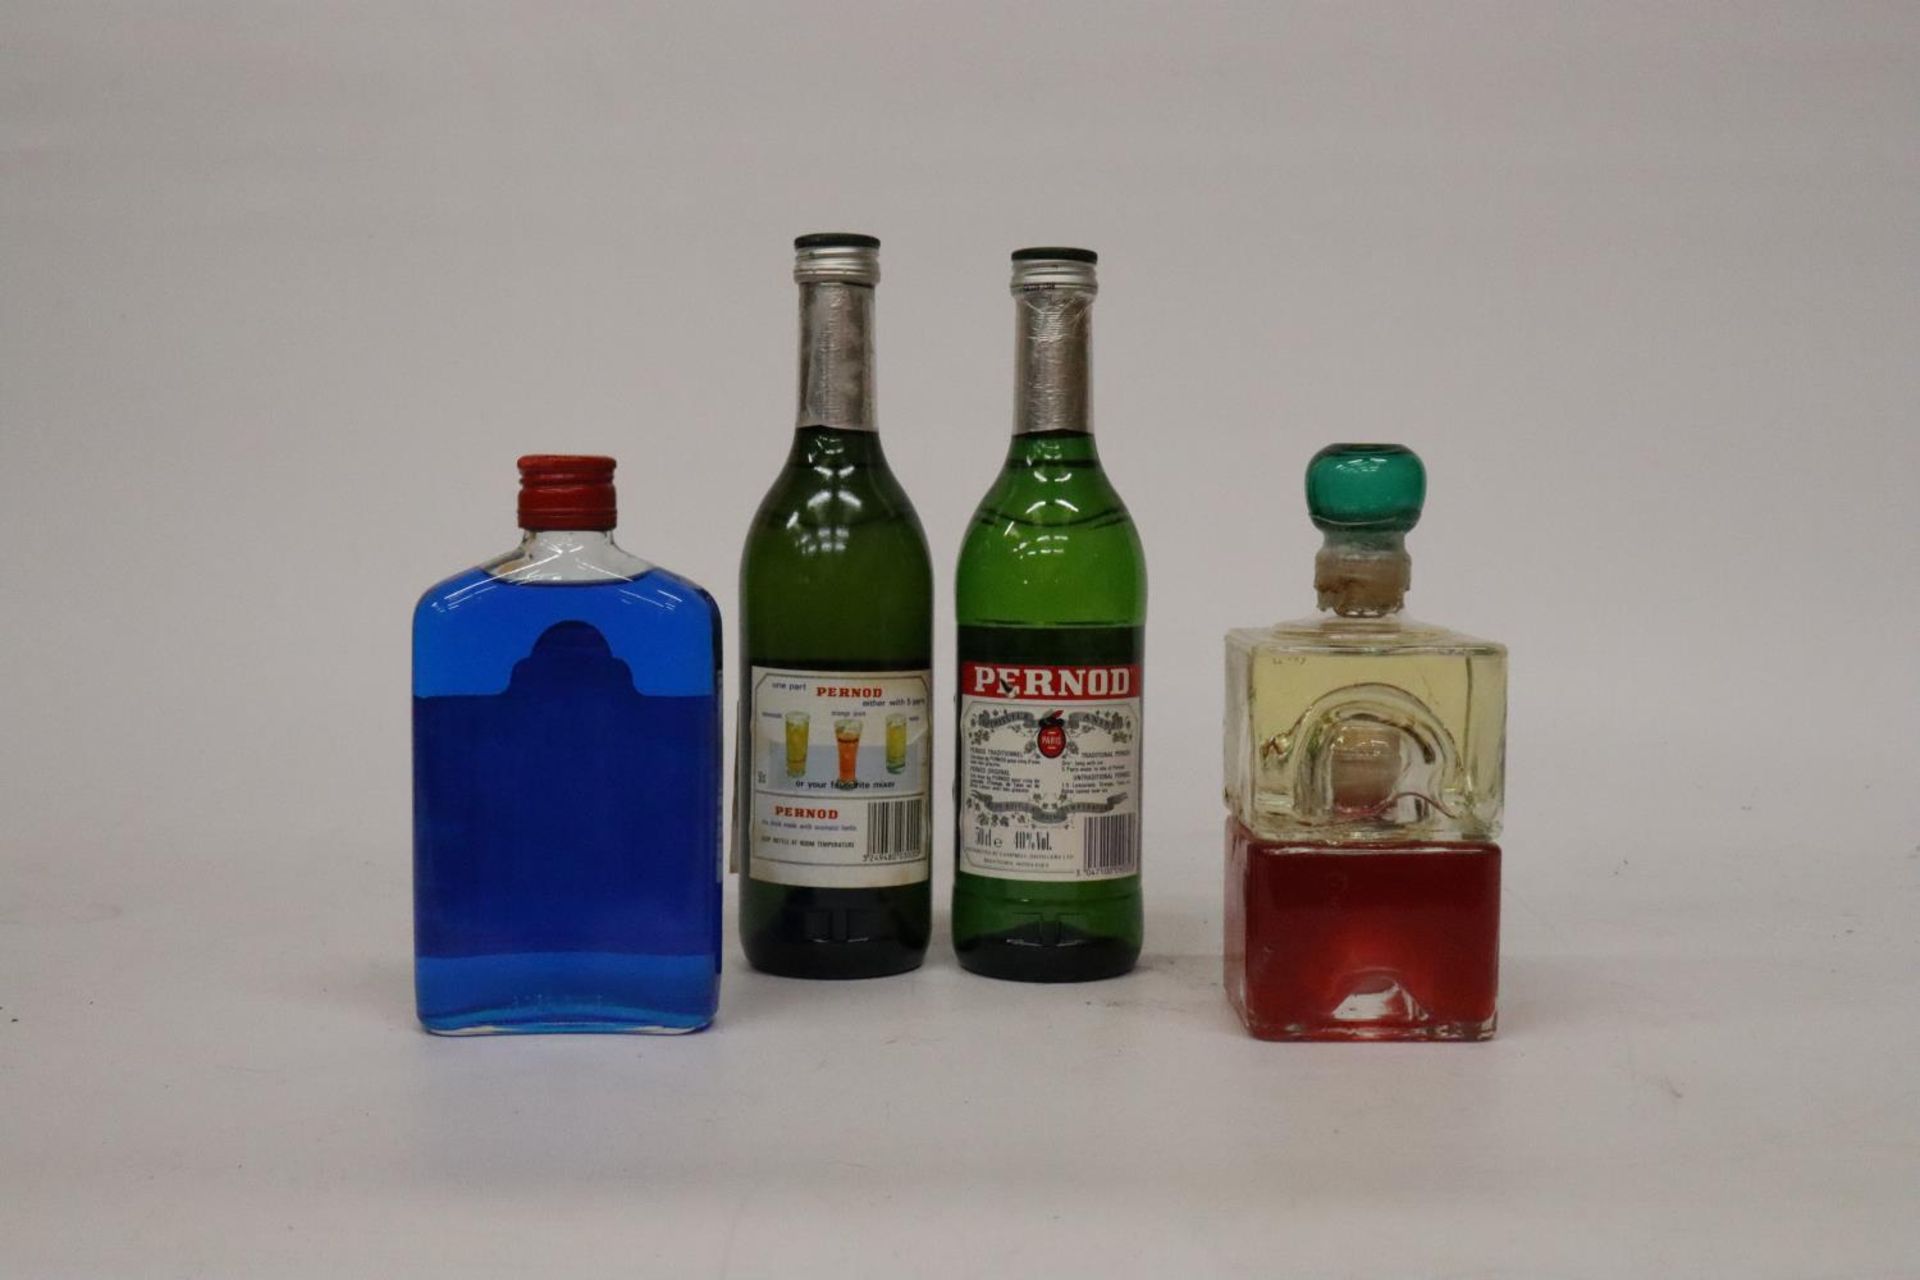 TWO 50CL BOTTLES OF PERNOD FILS, A 37.5CL BOTTLE OF BLUE CURACAO AND A BOTTLE OF - Image 4 of 4